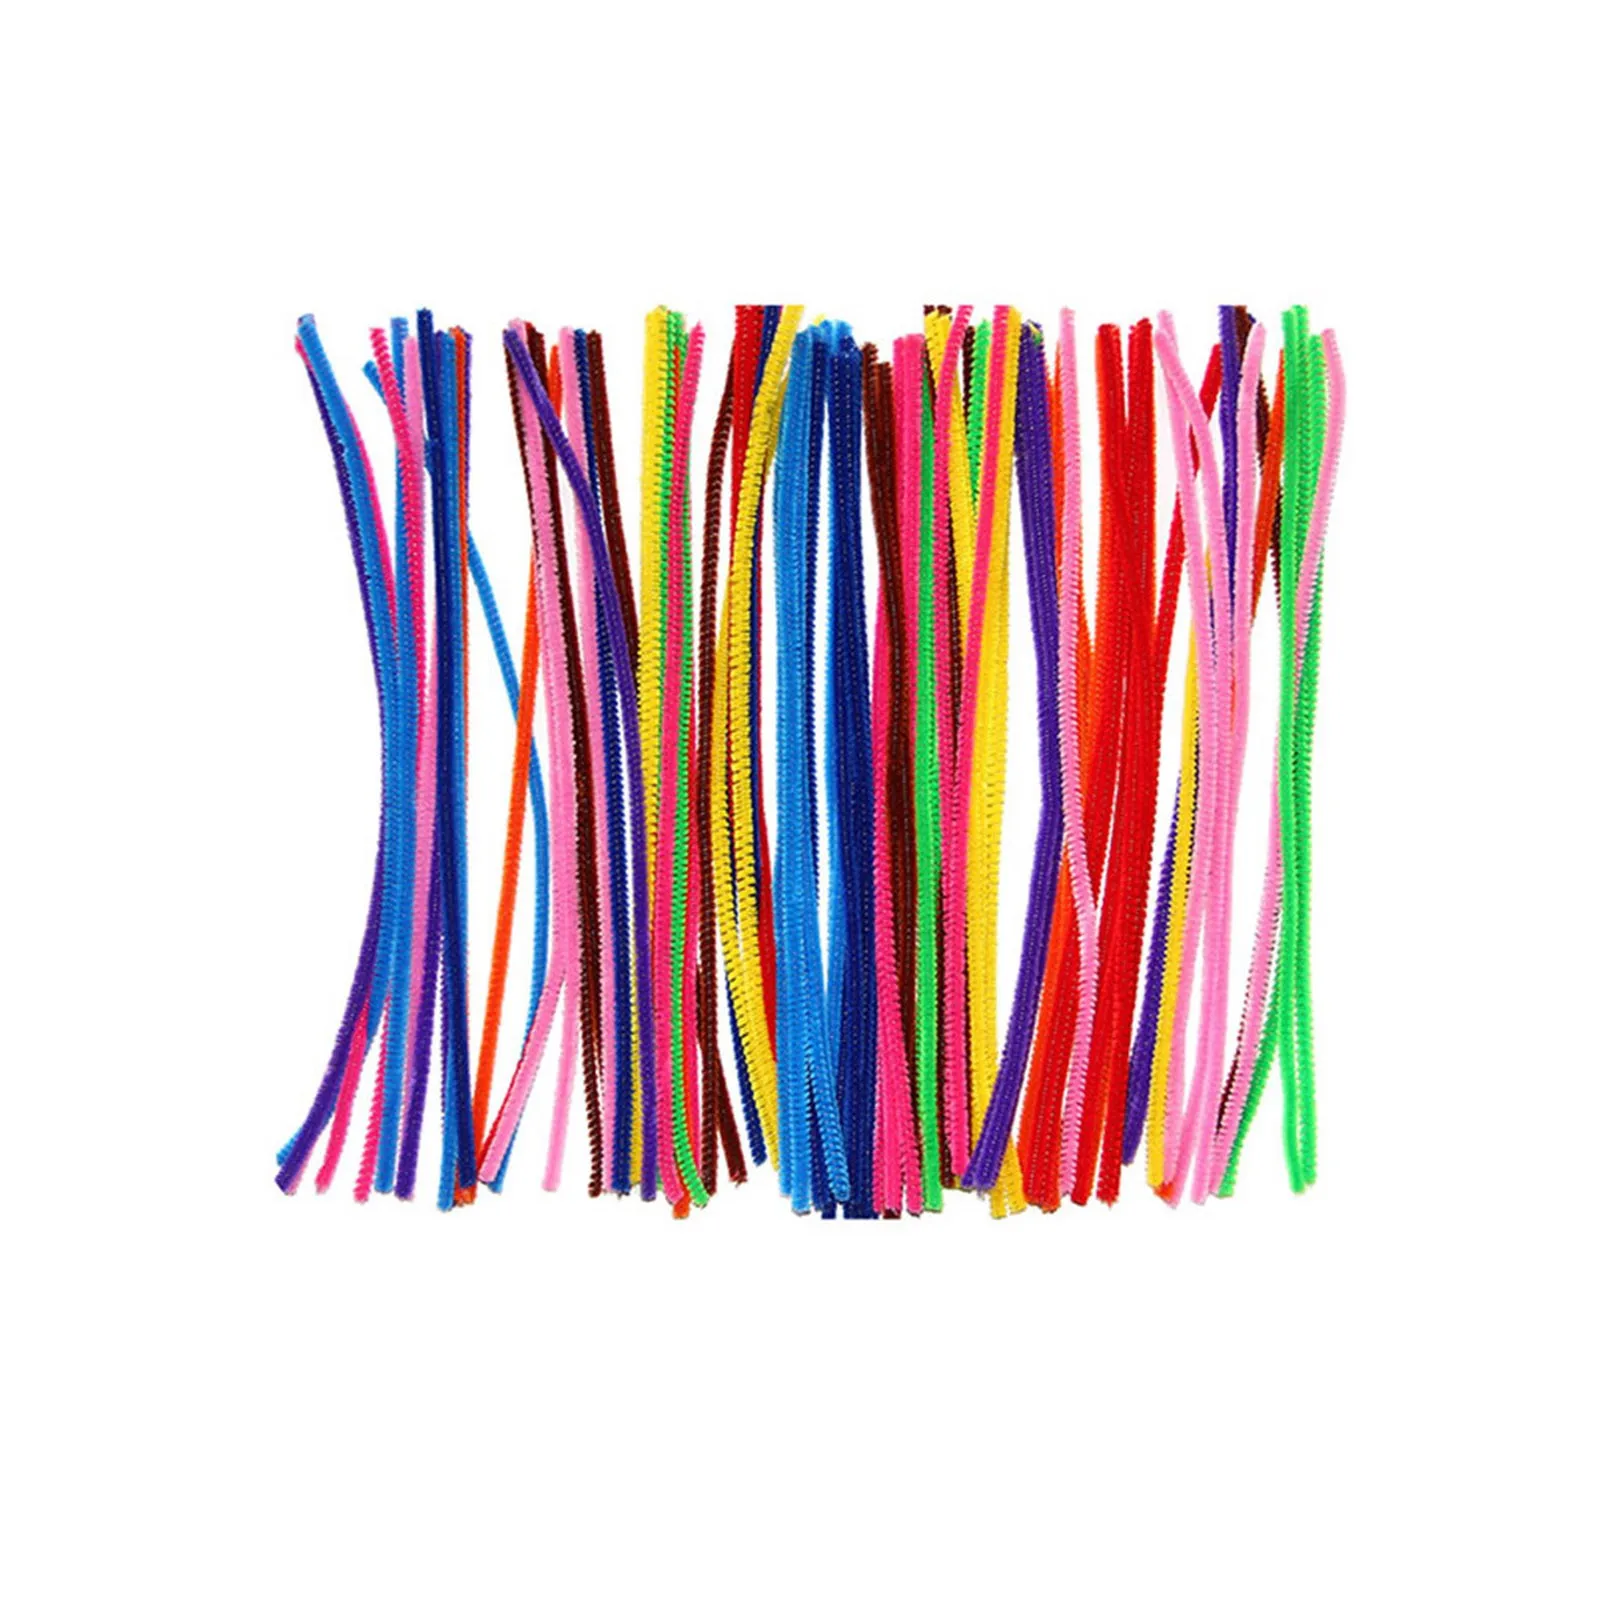 New 100pcs Multicolor Mixed Plush Iron Wire Flexible Flocking Craft Sticks  Pipe Cleaner Creativity Developing Kids Diy Toys - Diy Craft Supplies -  AliExpress